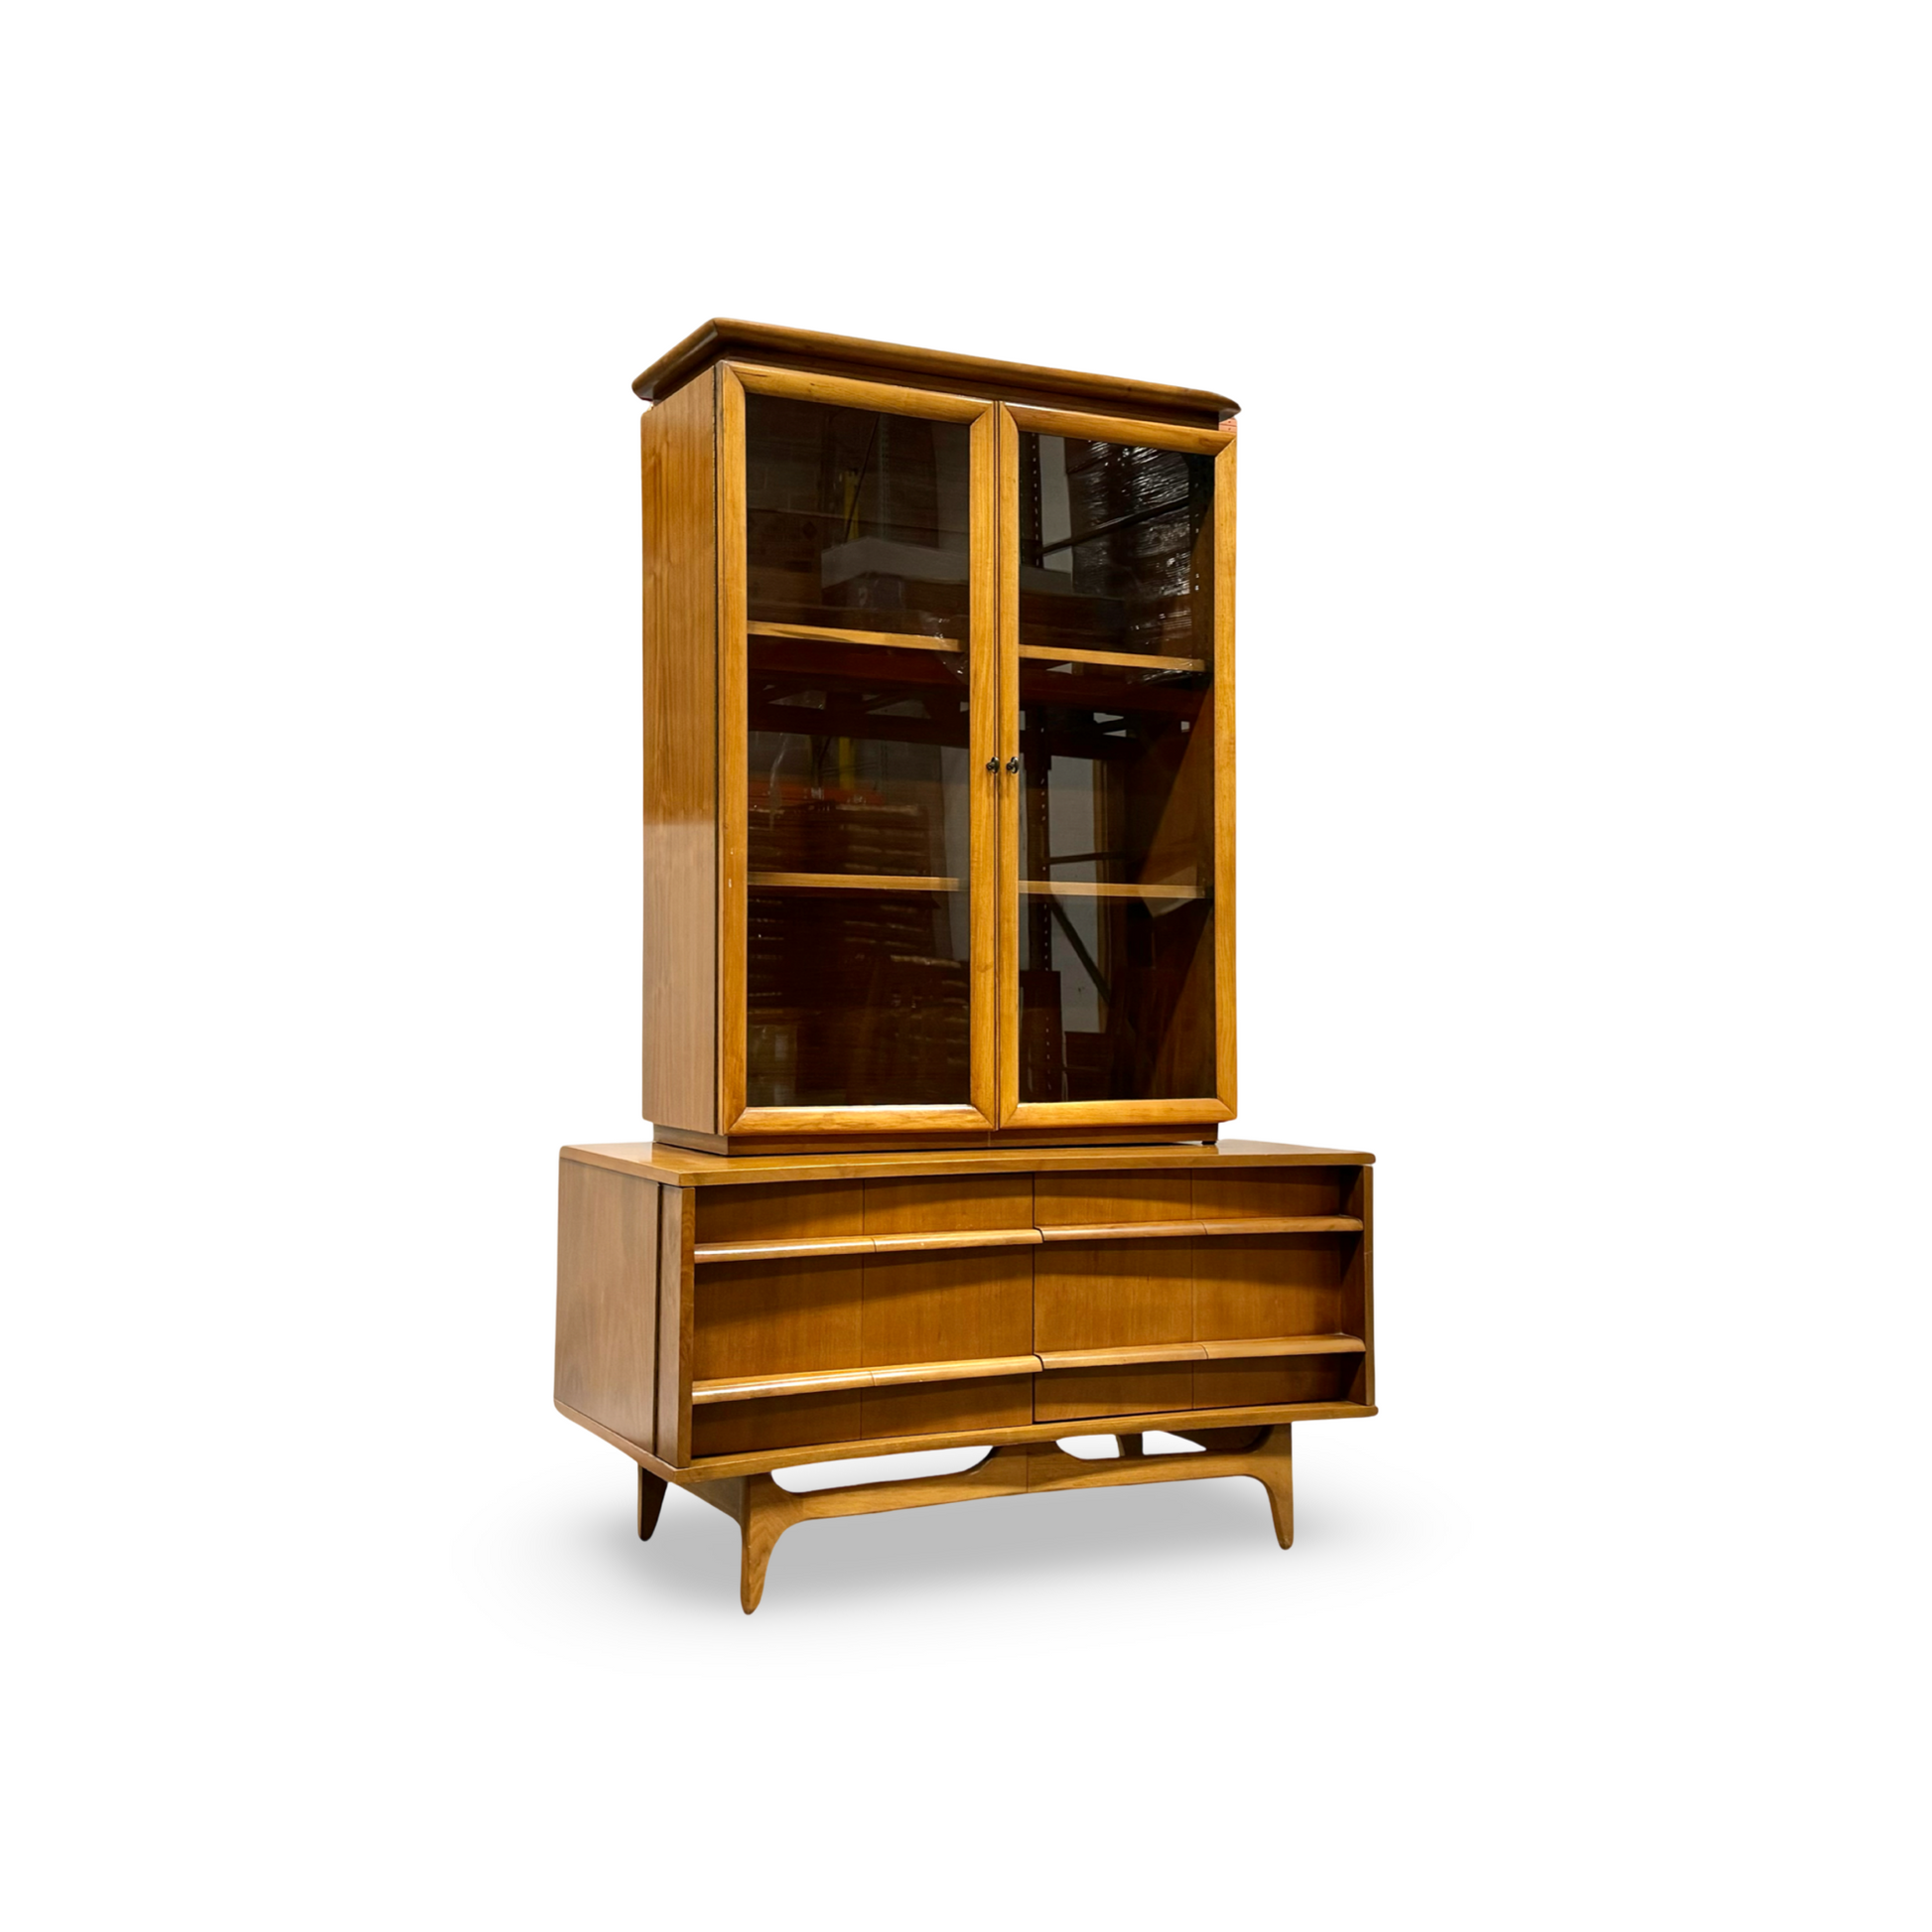 Young manufacturing vintage mid century modern China cabinet.